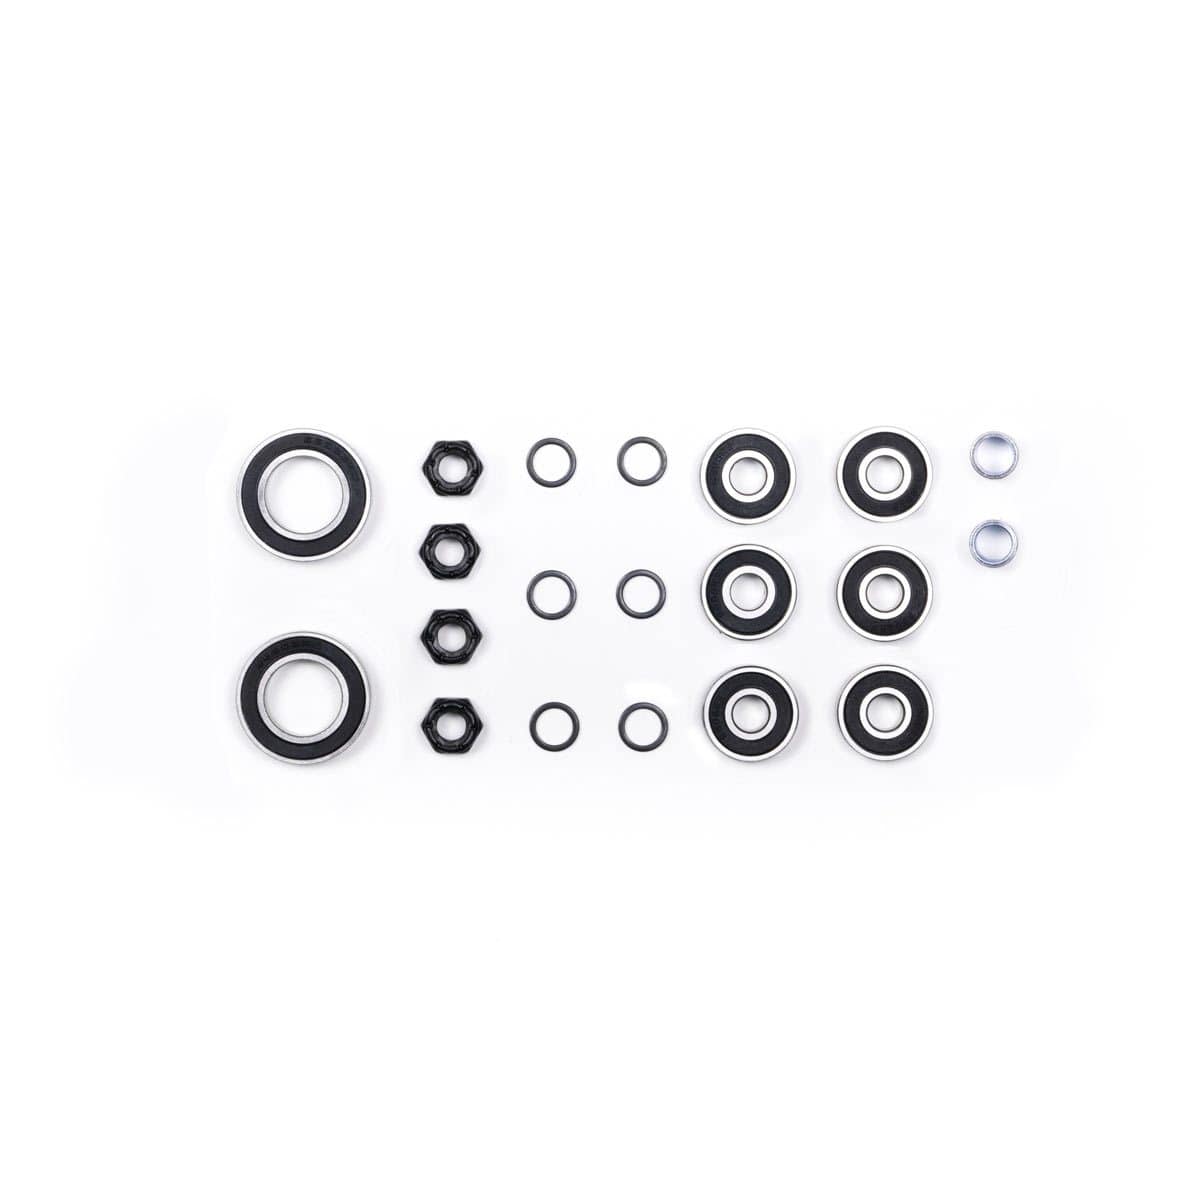 Boosted Bearing Service Kit for Boosted Boards